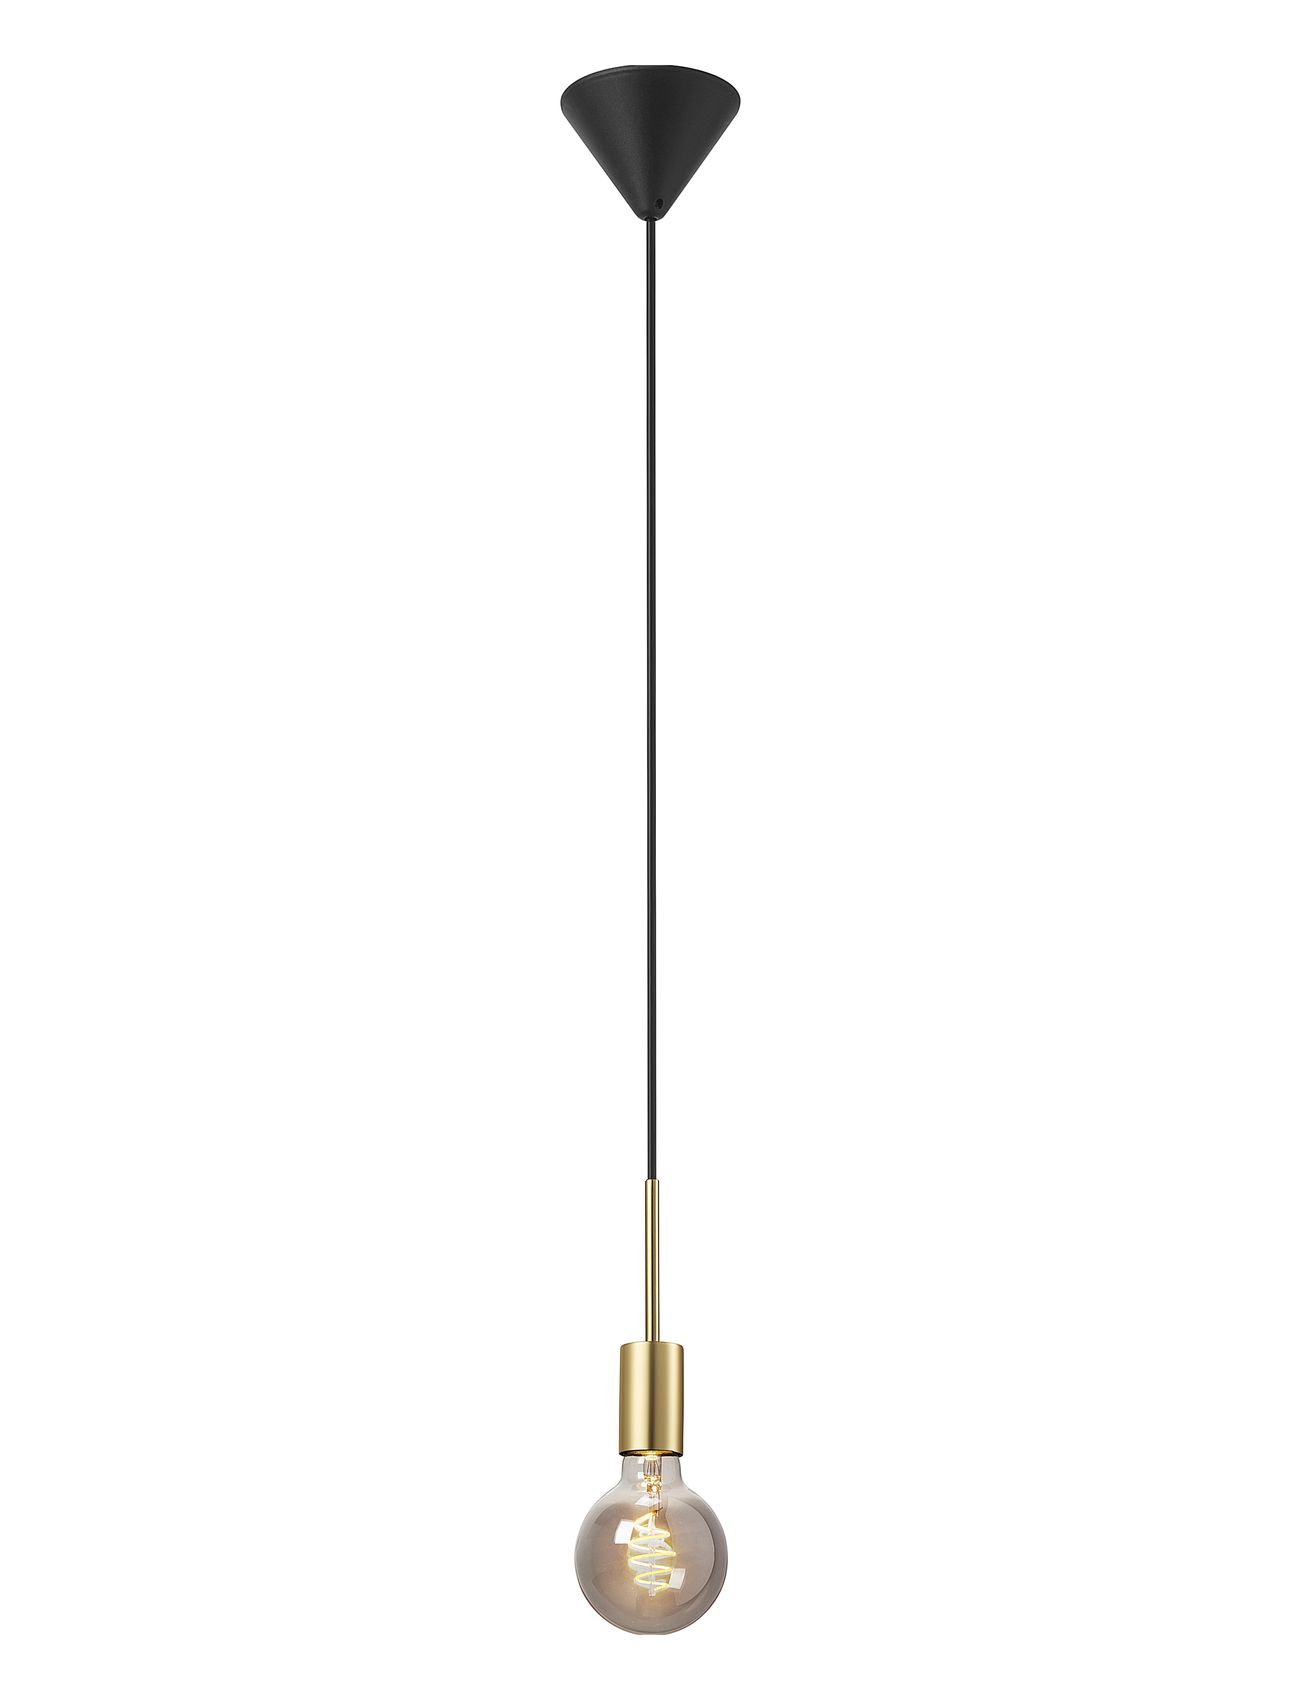 Paco/Susp. Home Lighting Lamps Ceiling Lamps Pendant Lamps Gold Nordlux